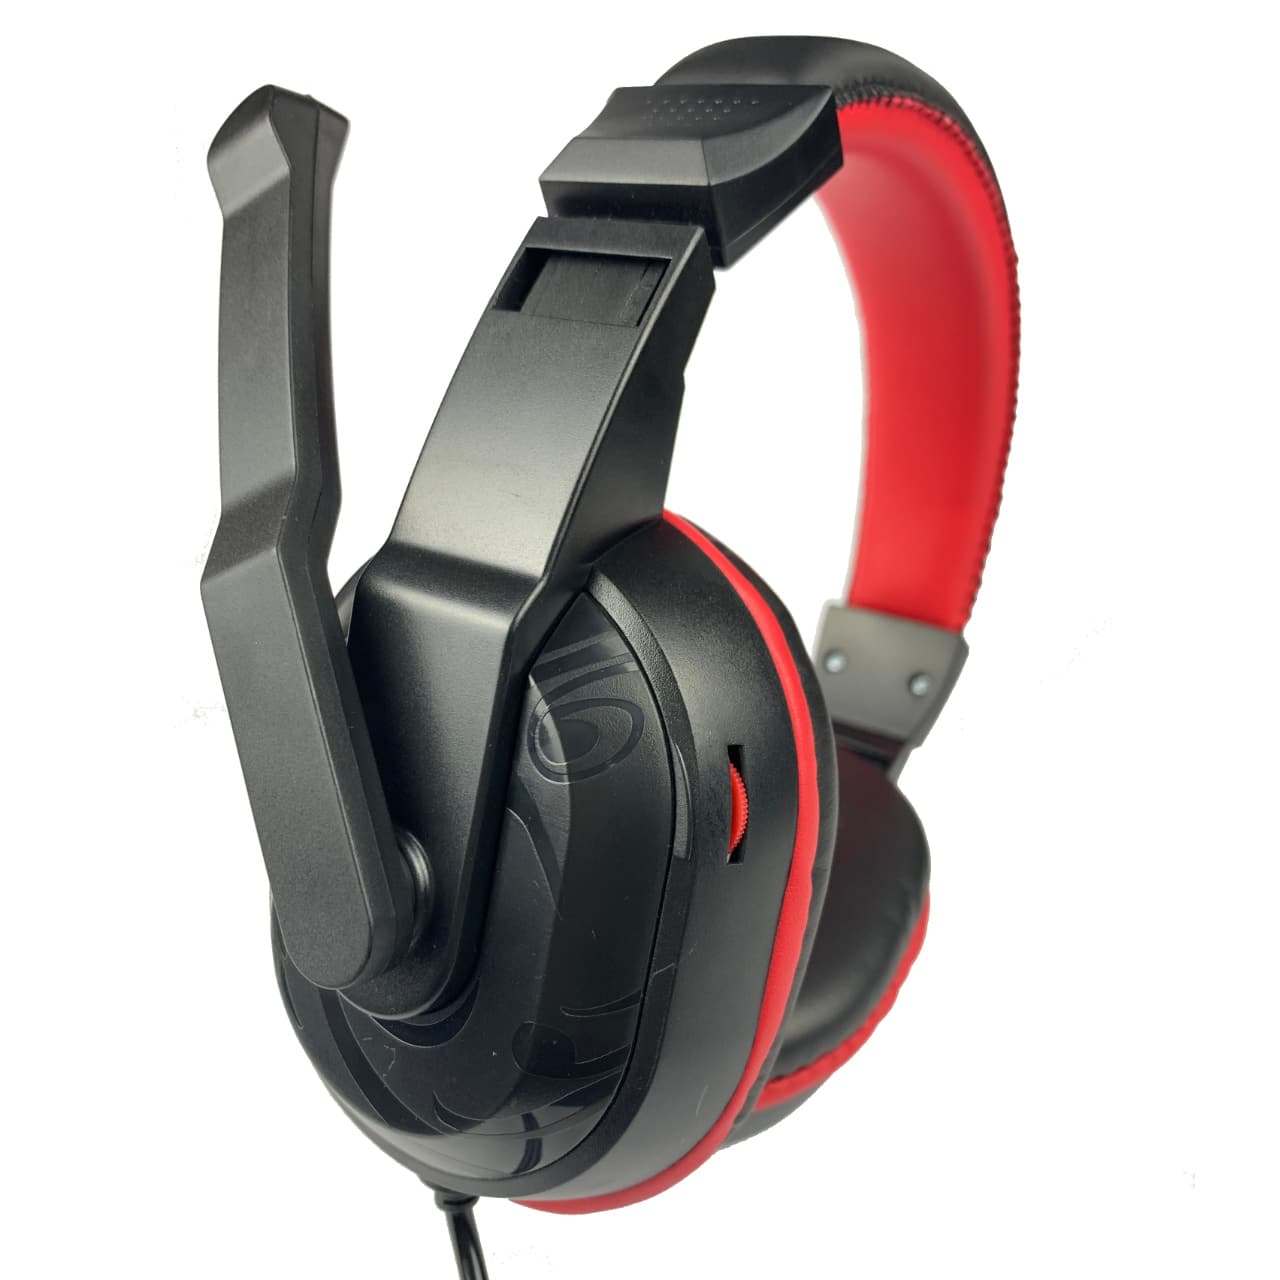 The Head Stereo Headset with Microphone Clear Calls